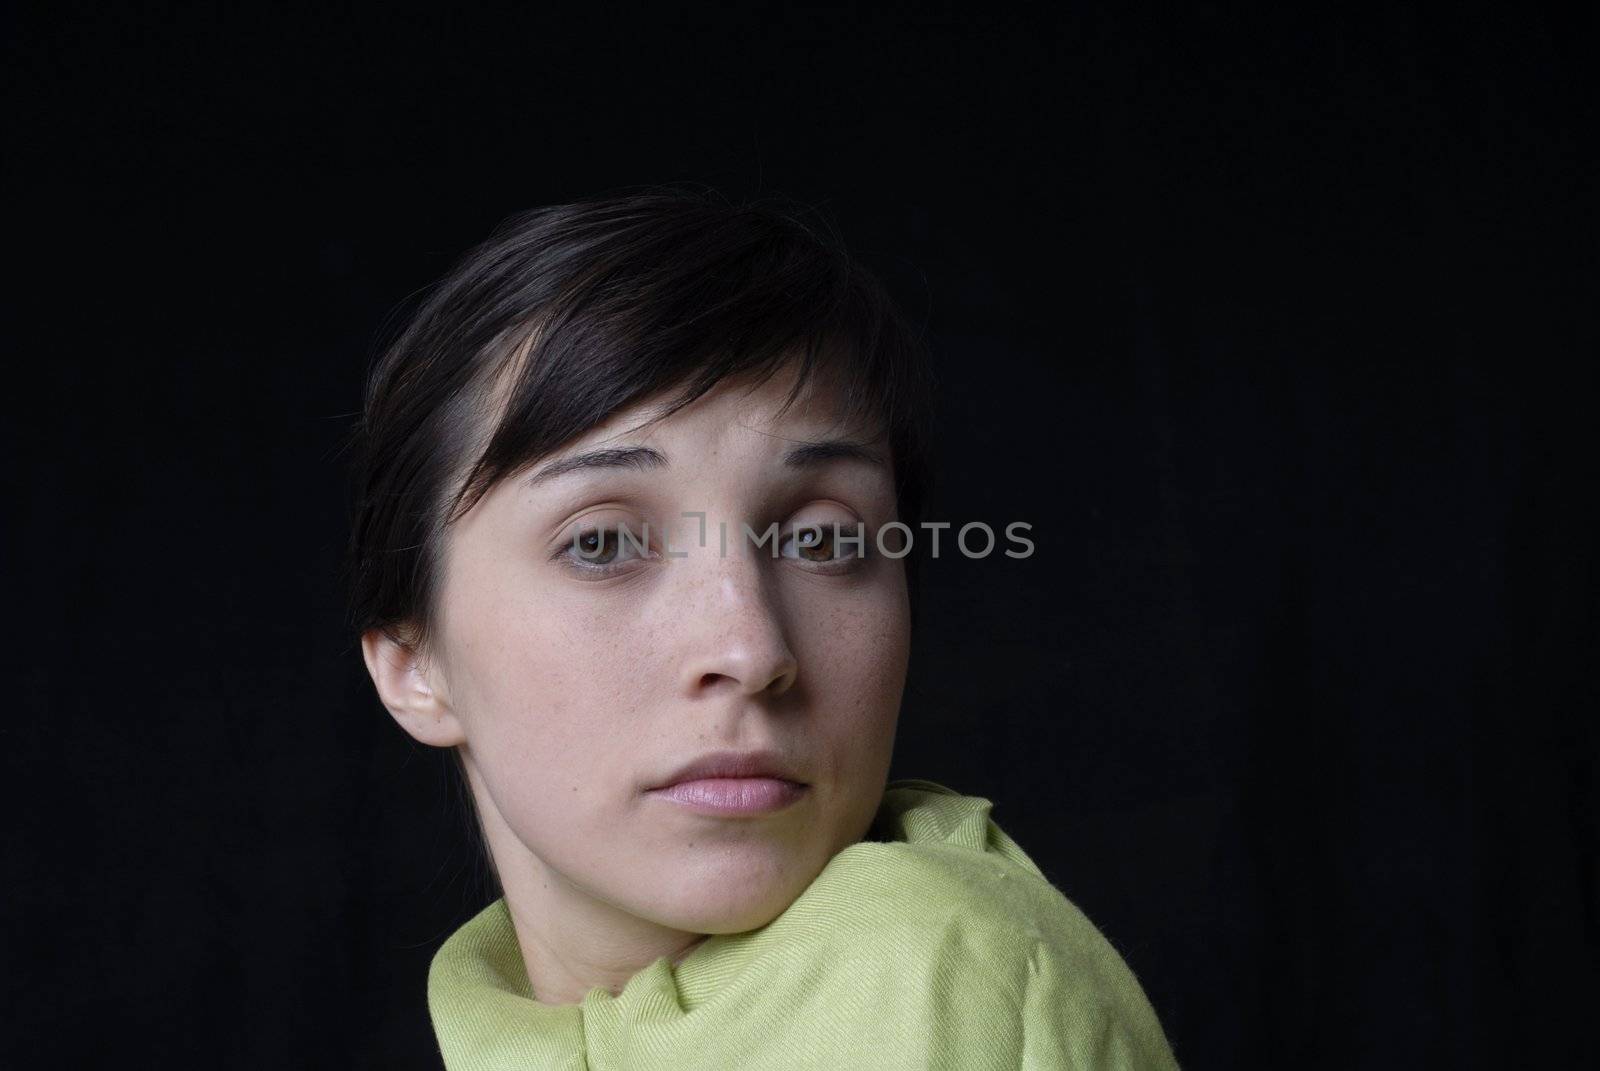 Young girl portrait isolated on black background